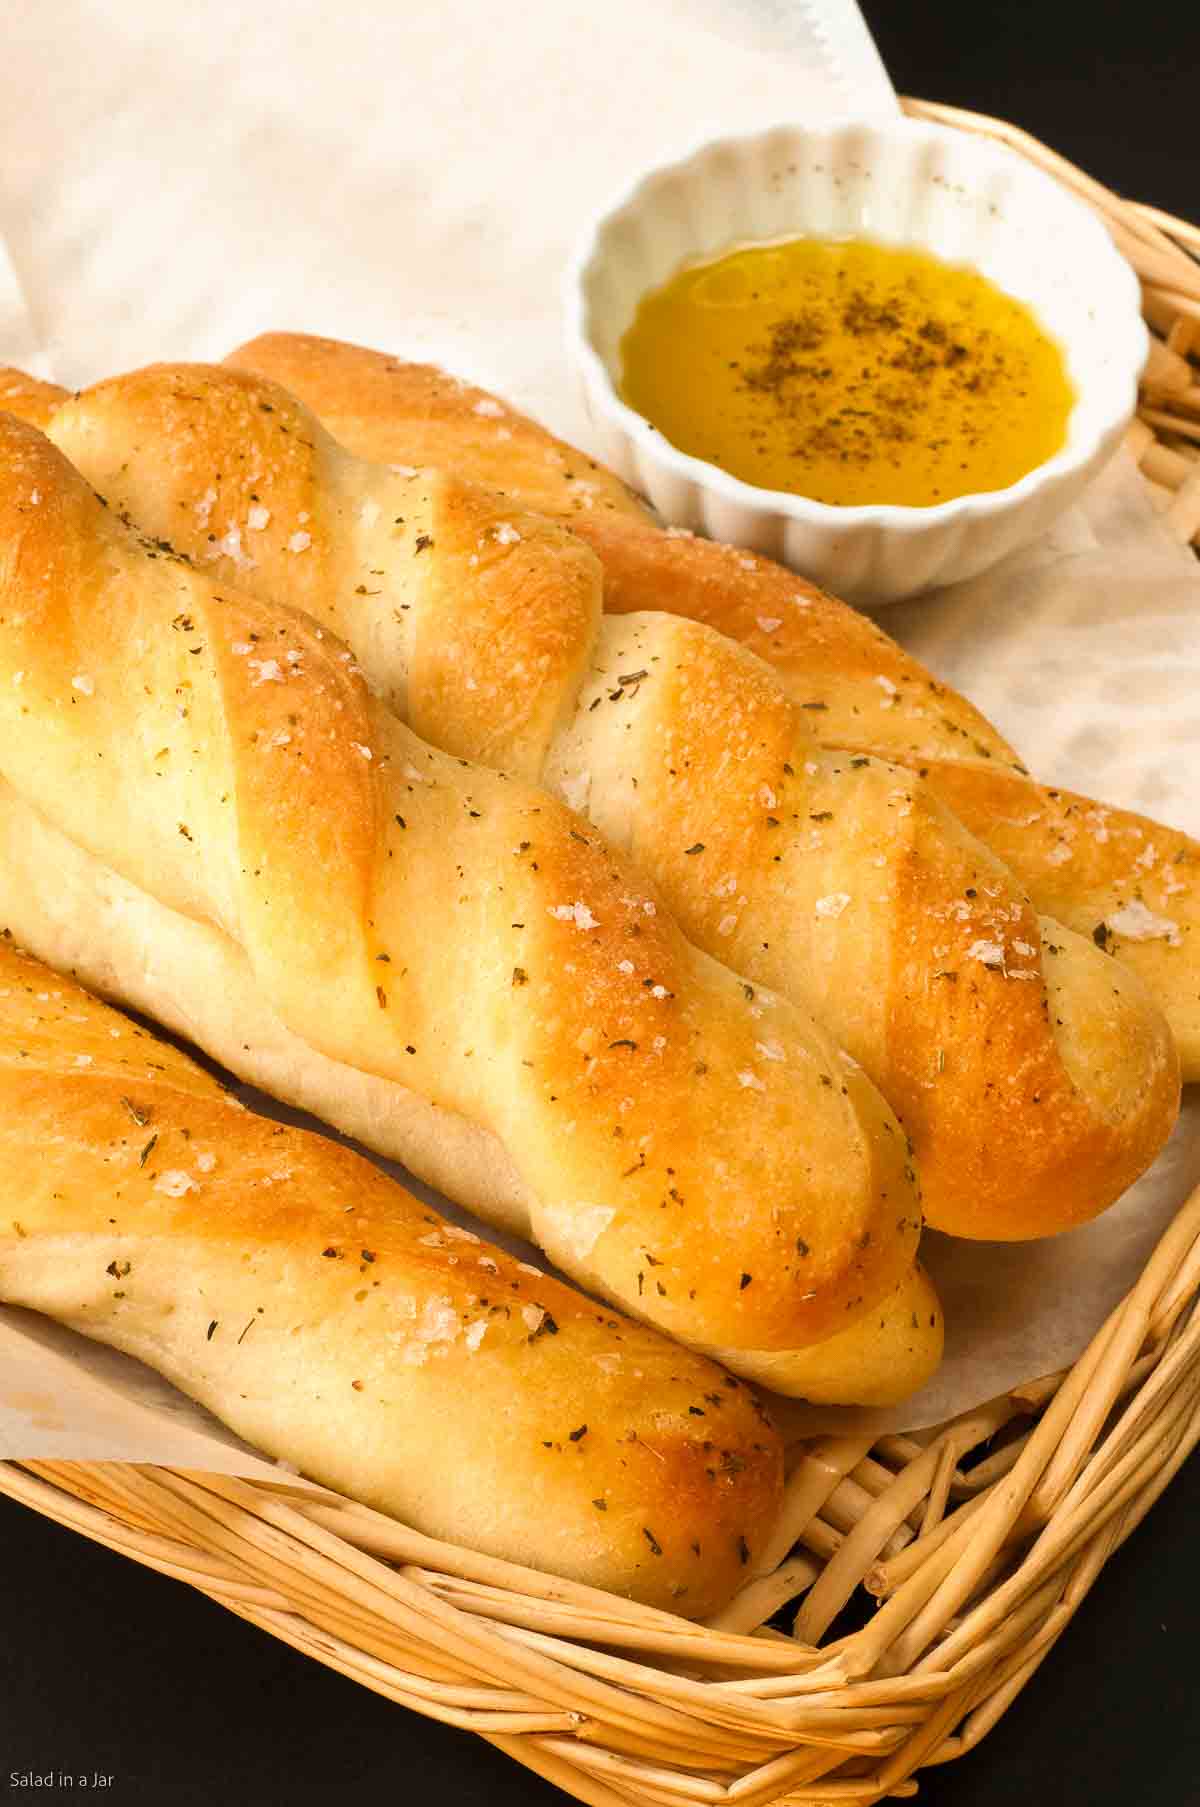 garlic bread machine breadsticks in a basket with dipping oil on the side.